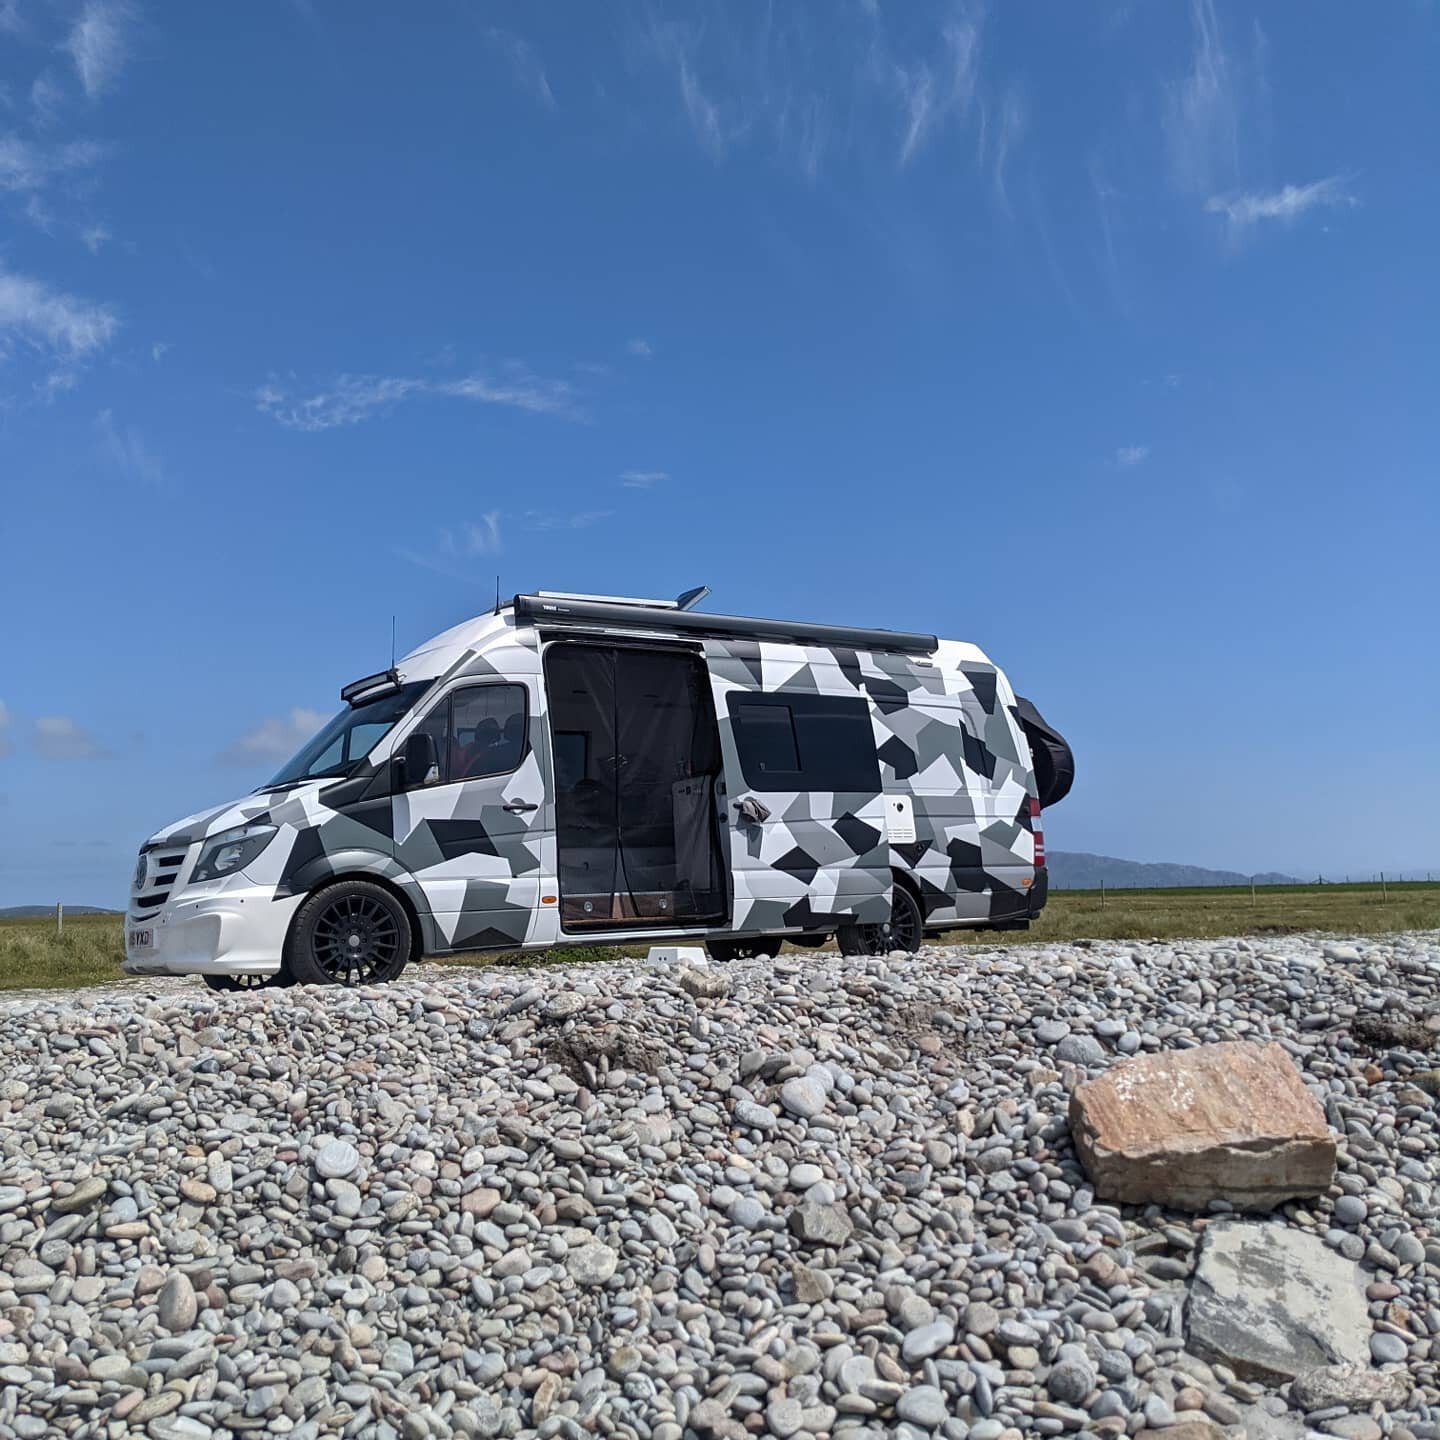 It's been a quiet week at the workshop whilst most of us have been on holiday 😎

#vanlife in the Outer Hebrides is just perfect. Why travel abroad when right here in Scotland there is so much beauty!

@visitscotland @visitouterhebrides @mercedesbenz